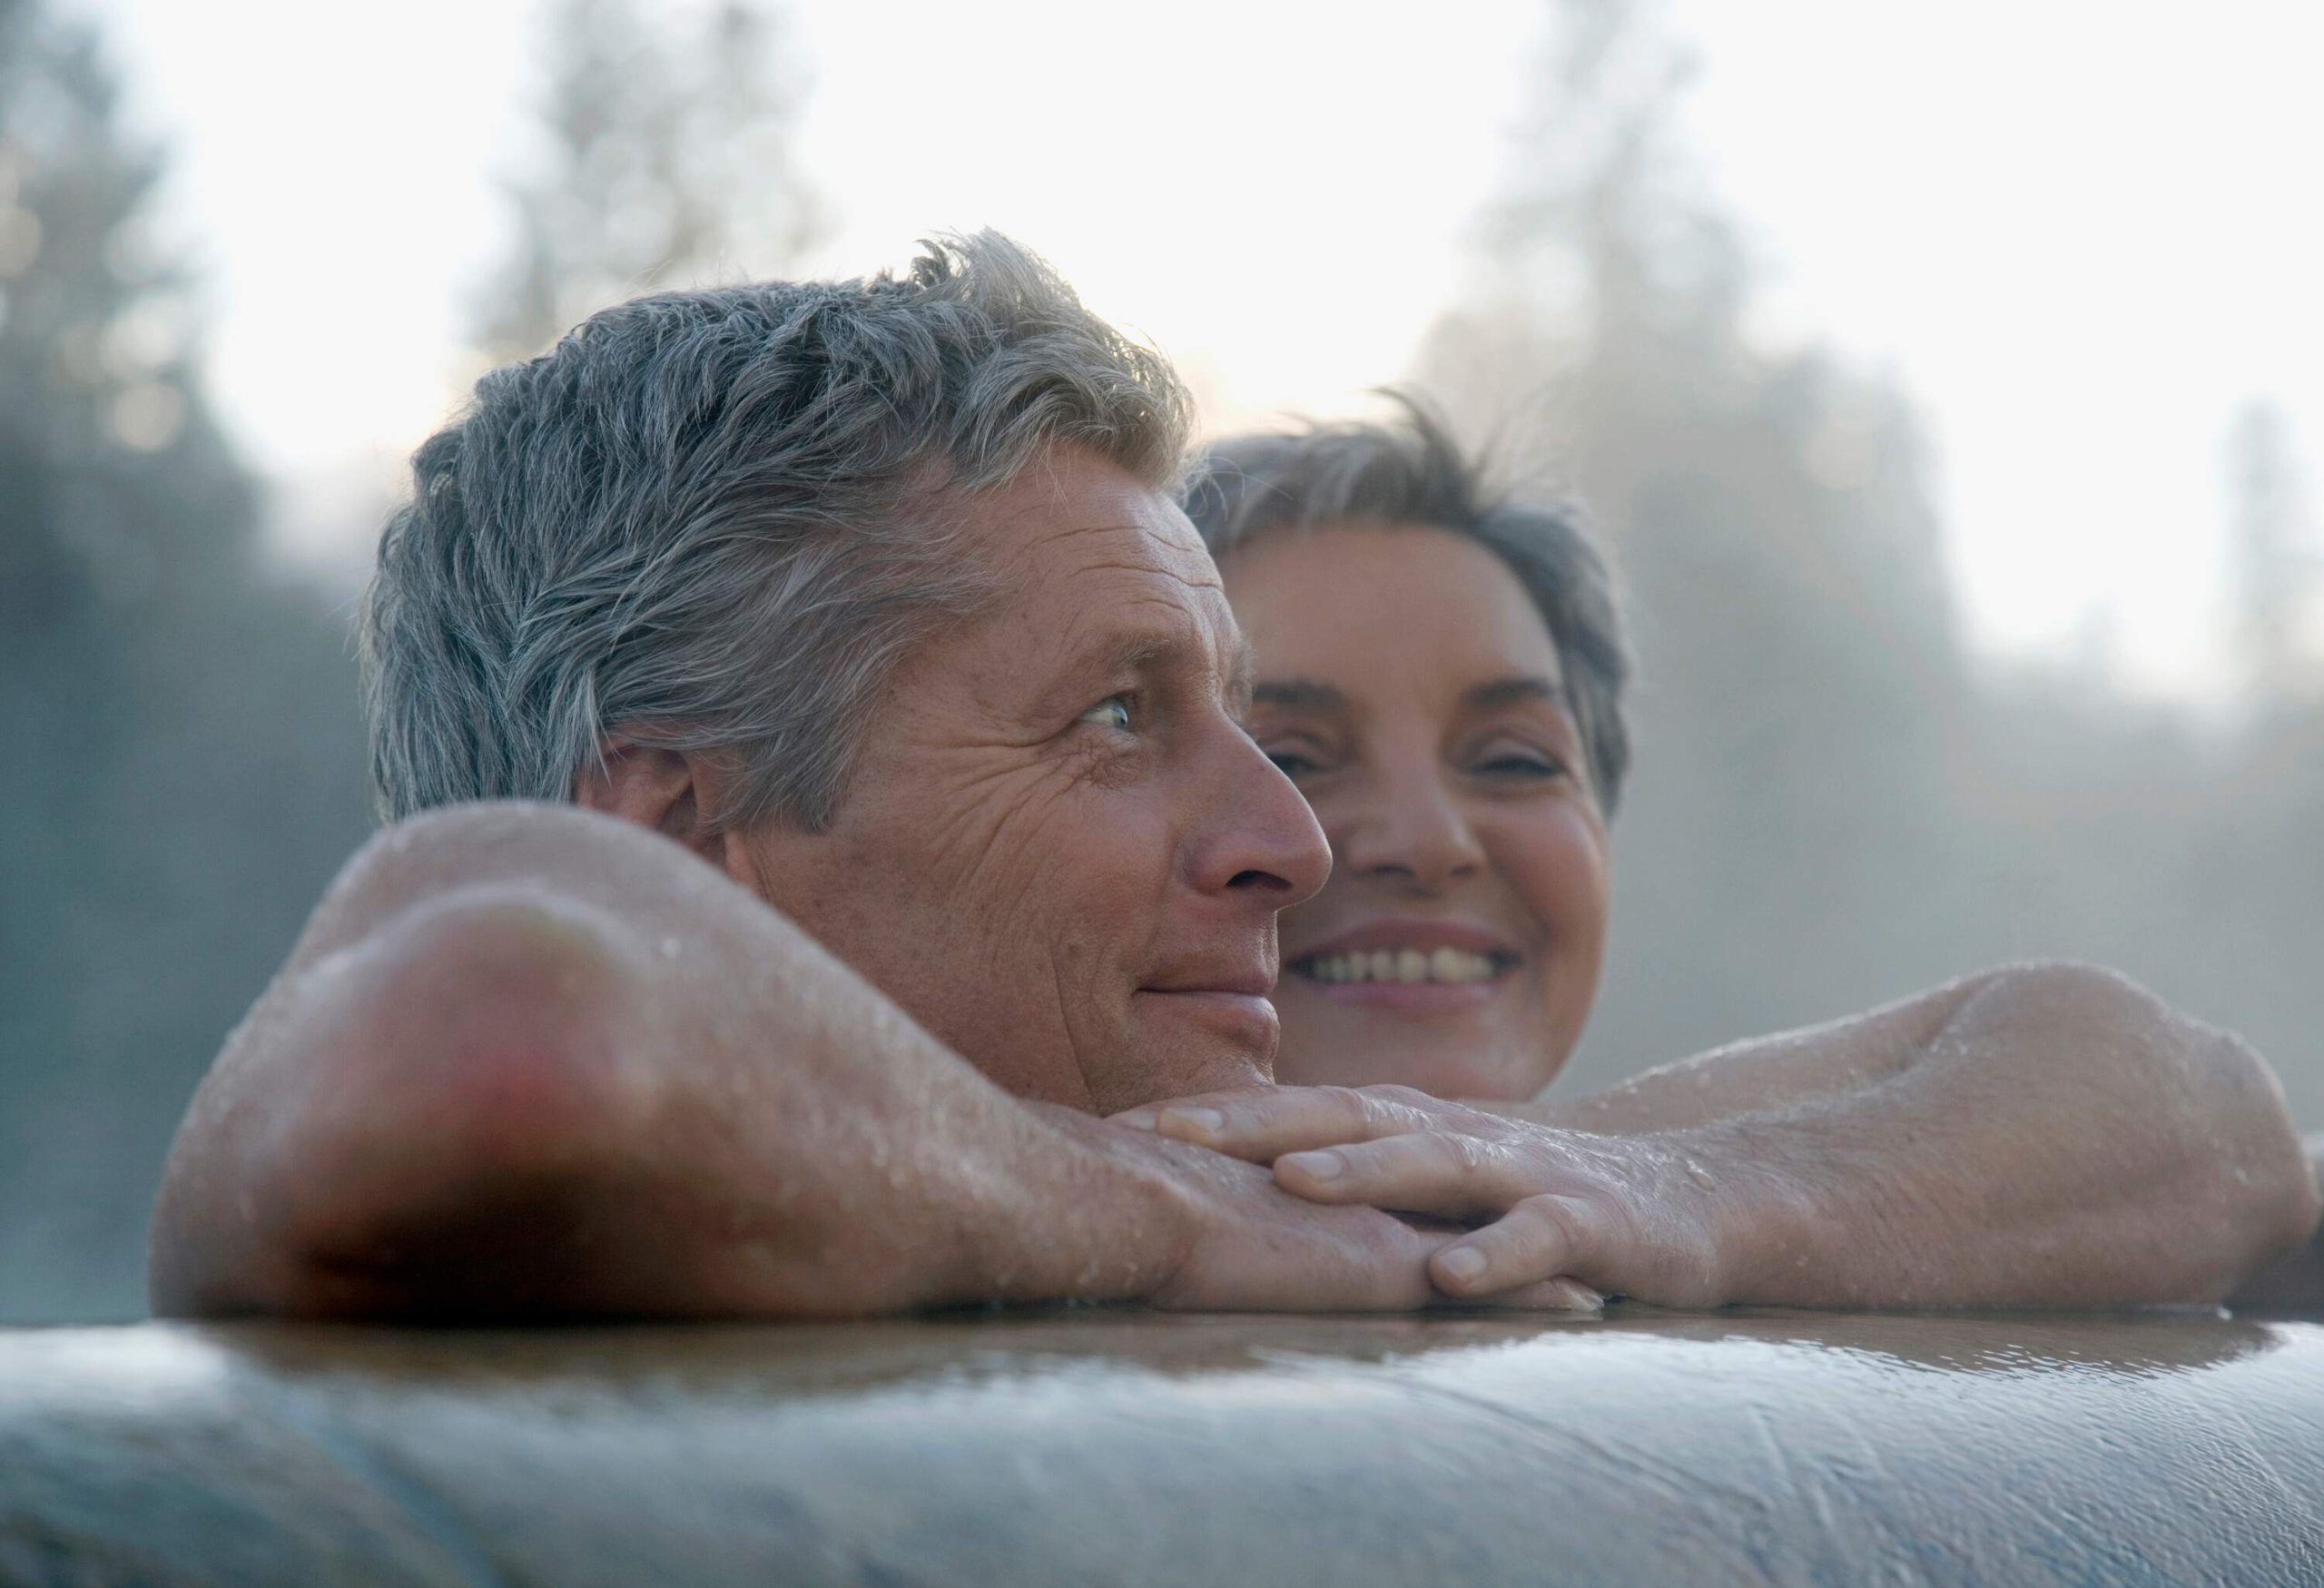 An elderly couple smiles while leaning on the edge of a jacuzzi.